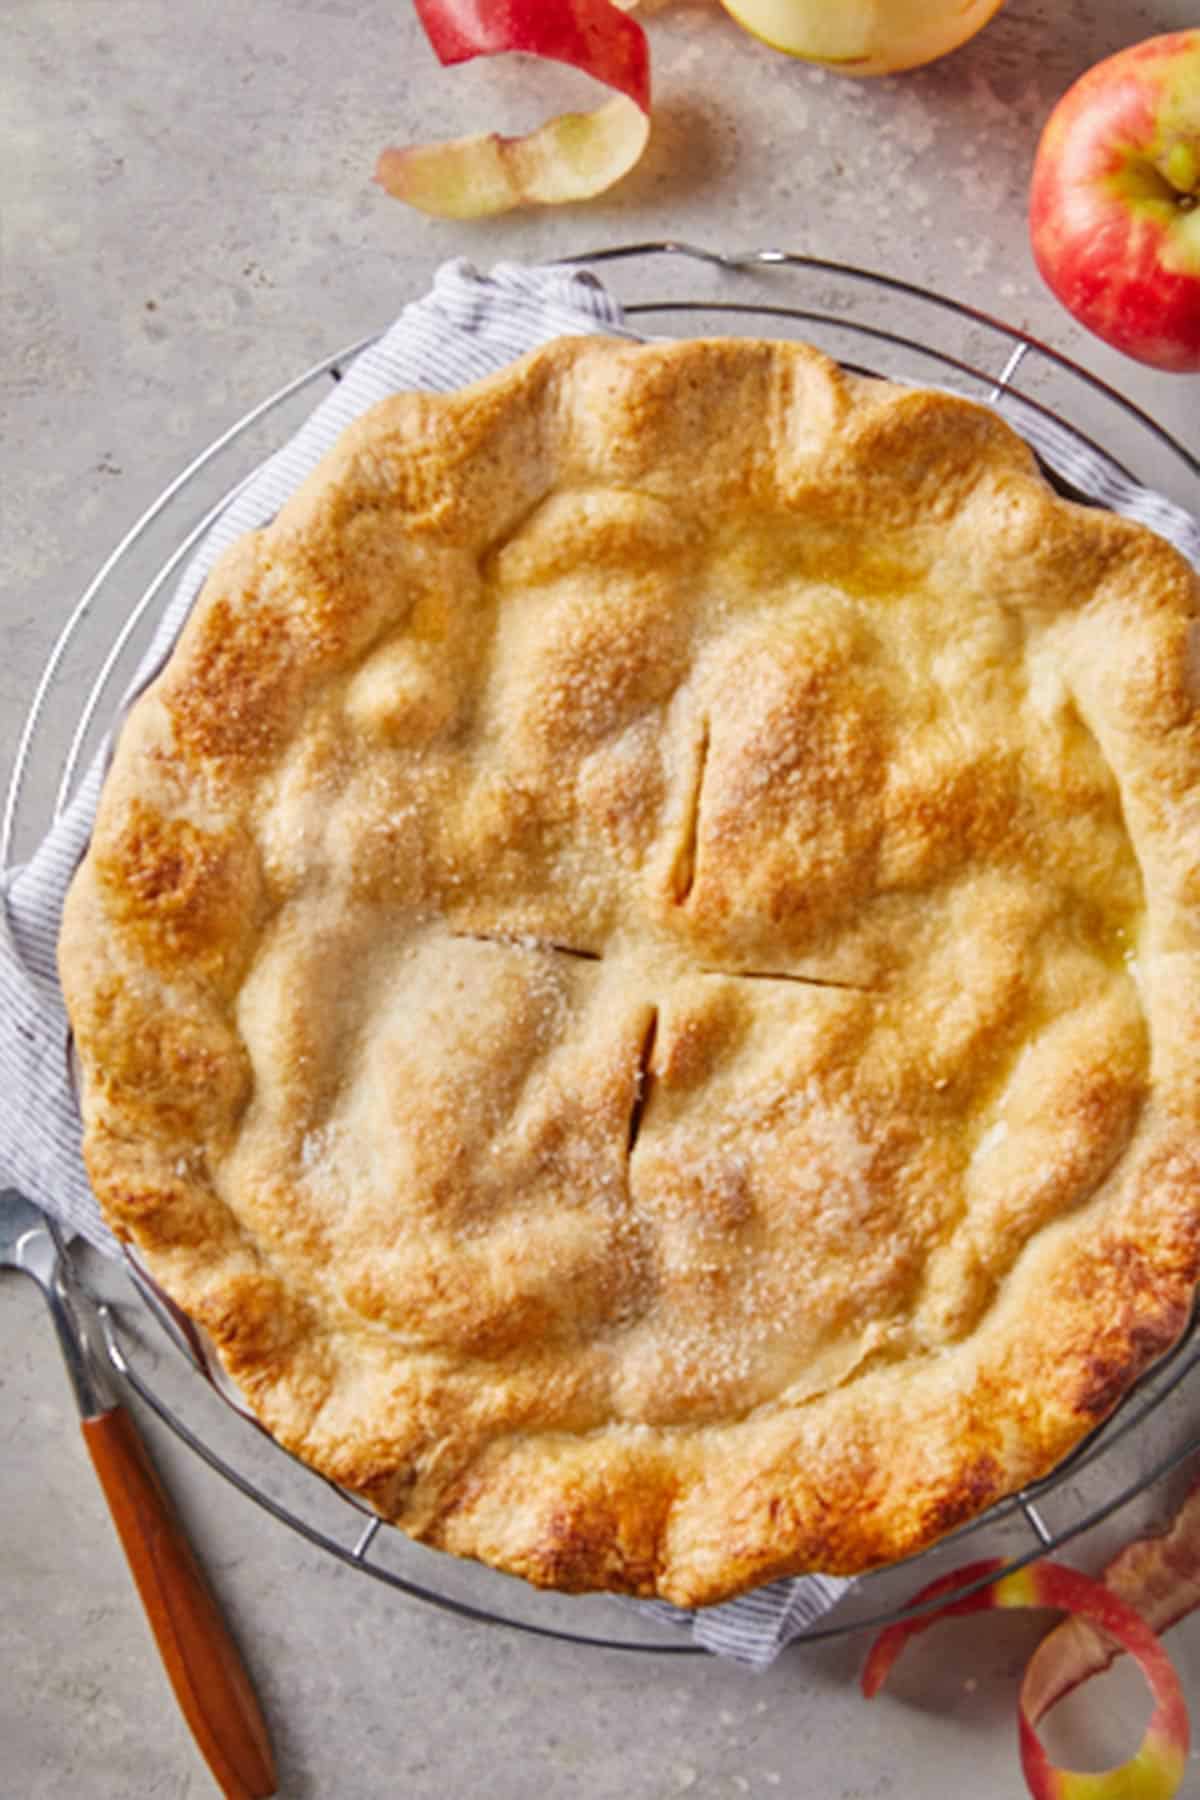 A fully baked southern apple pie fresh from the oven.